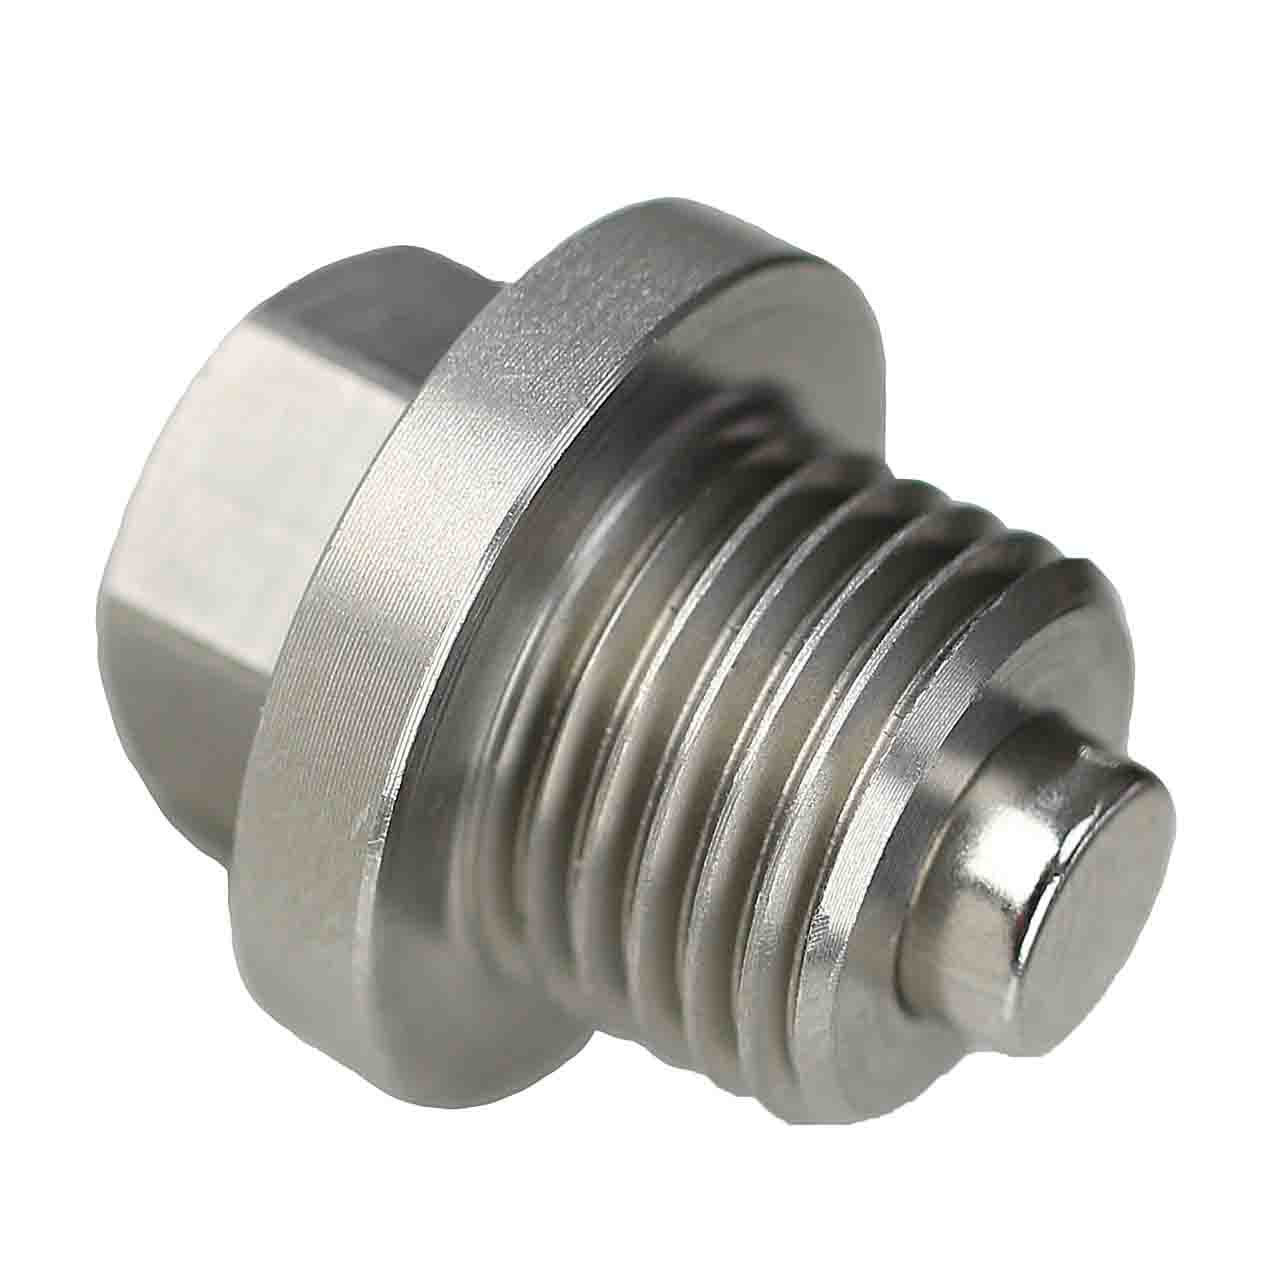 MG MGA Magnetic Oil Drain Plug - 1956-1959 - 1.5 Liter - 4 Cylinder - Made In USA - Stainless Steel - Part Number 88G257